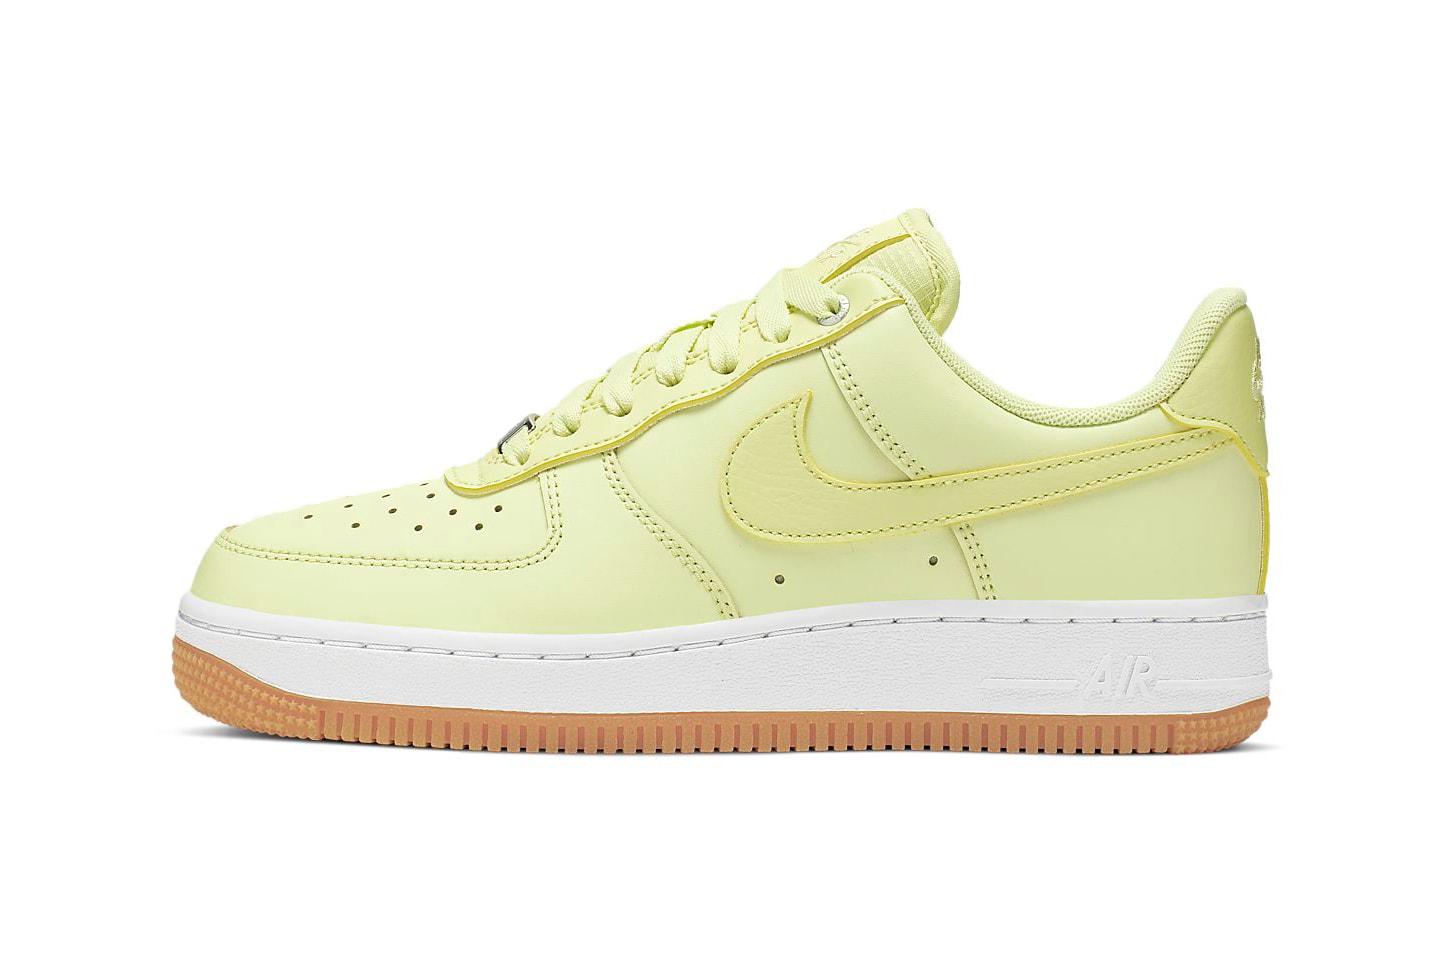 Nike Air Force 1 '07 white and Fluro green trainers